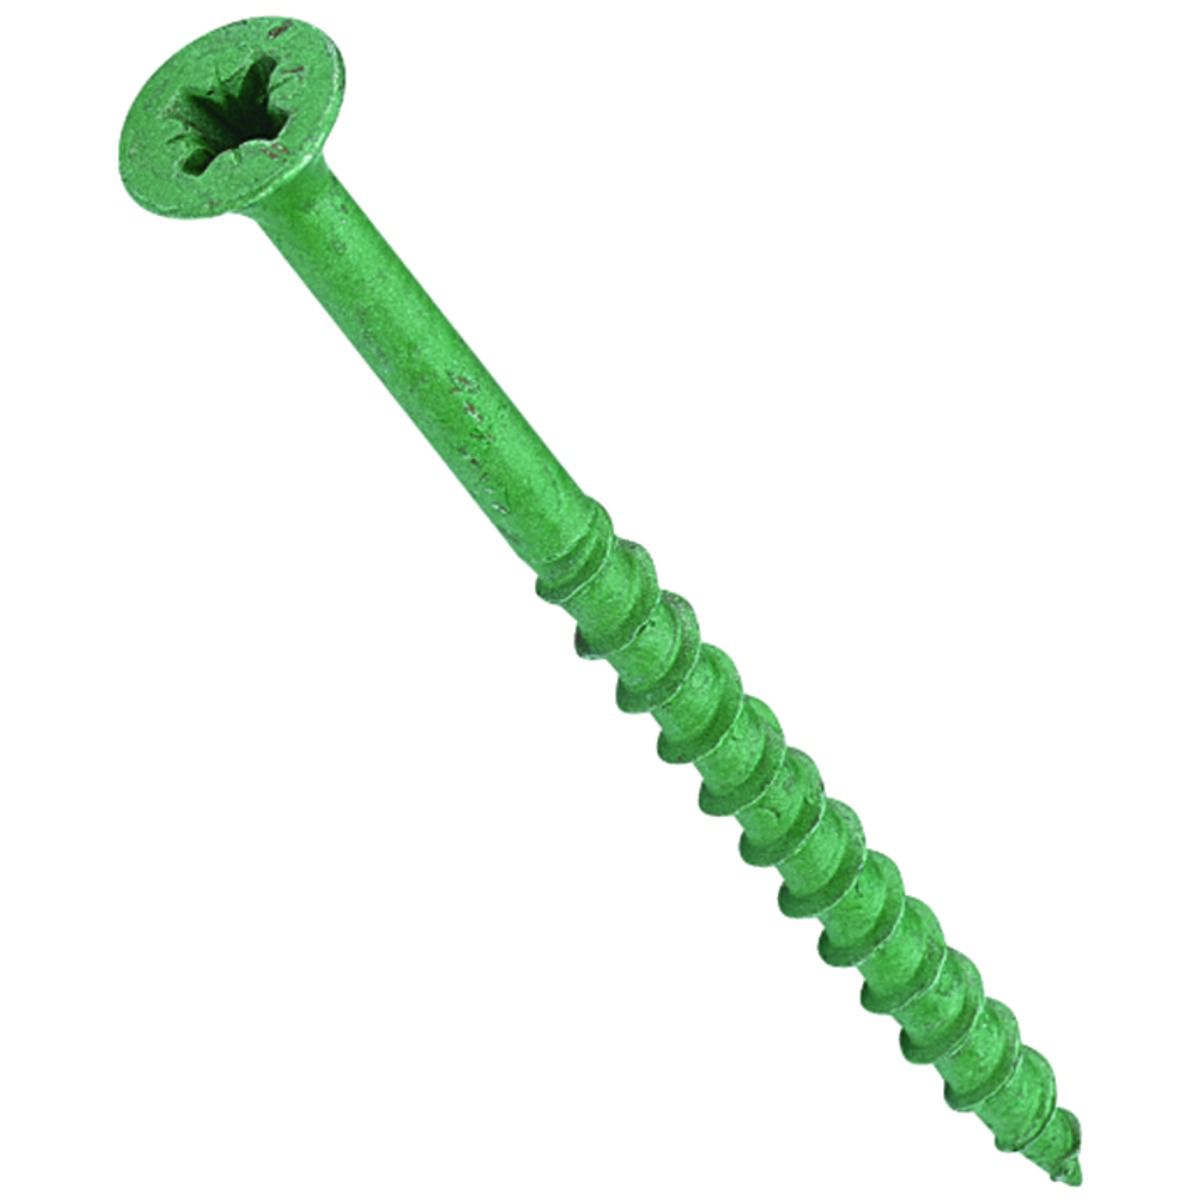 Image of Wickes External Grade Screws - Green No 8 x 50mm Pack of 20